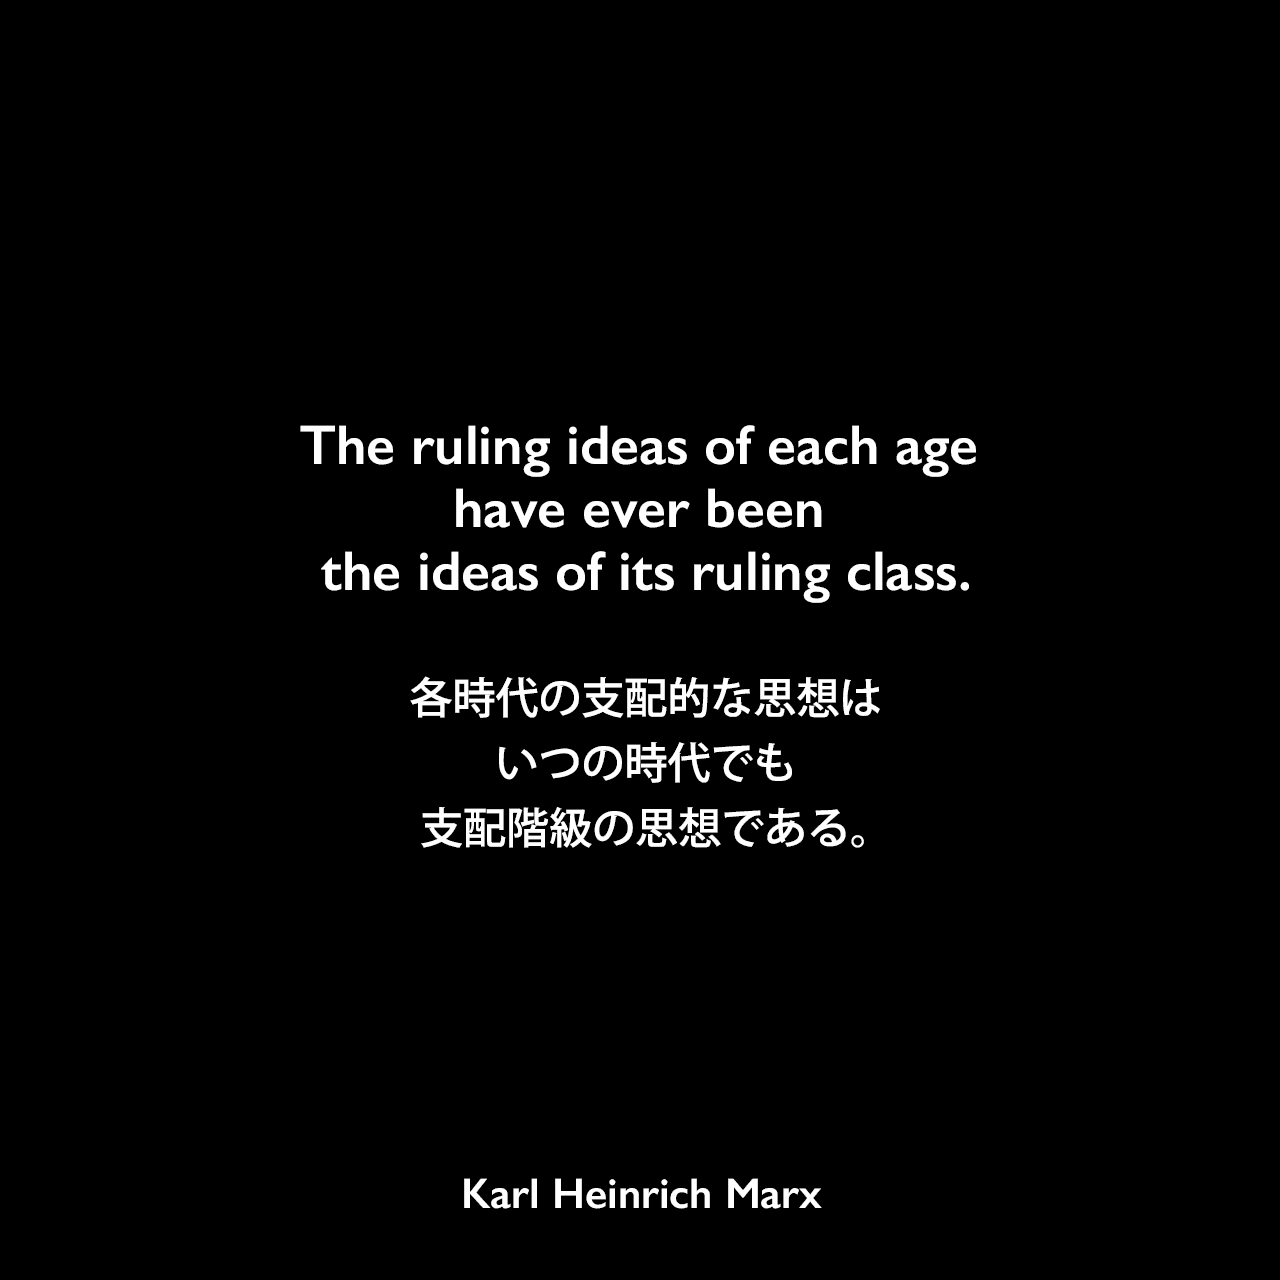 The ruling ideas of each age have ever been the ideas of its ruling class.各時代の支配的な思想は、いつの時代でも支配階級の思想である。Karl Heinrich Marx